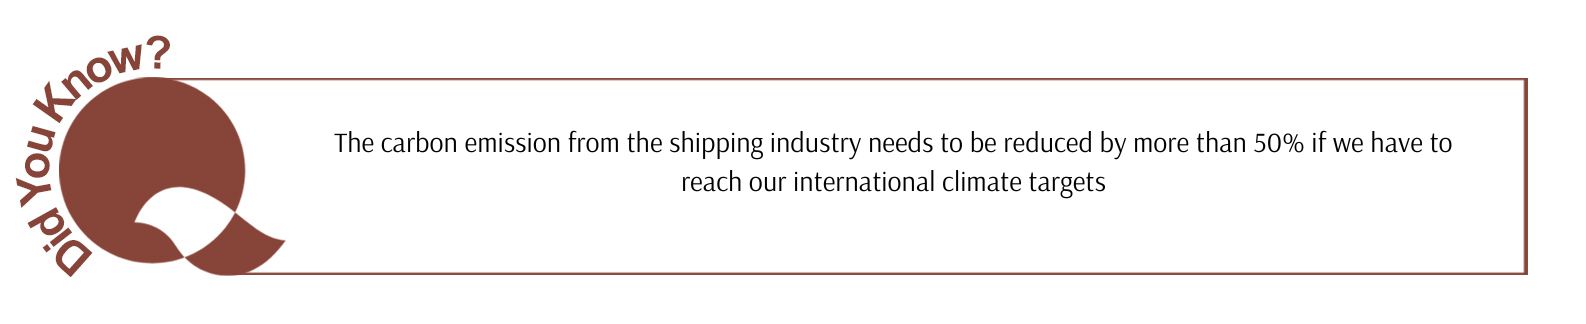 The carbon emission from the shipping industry needs to be reduced by more than 50% if we have to reach our international climate targets